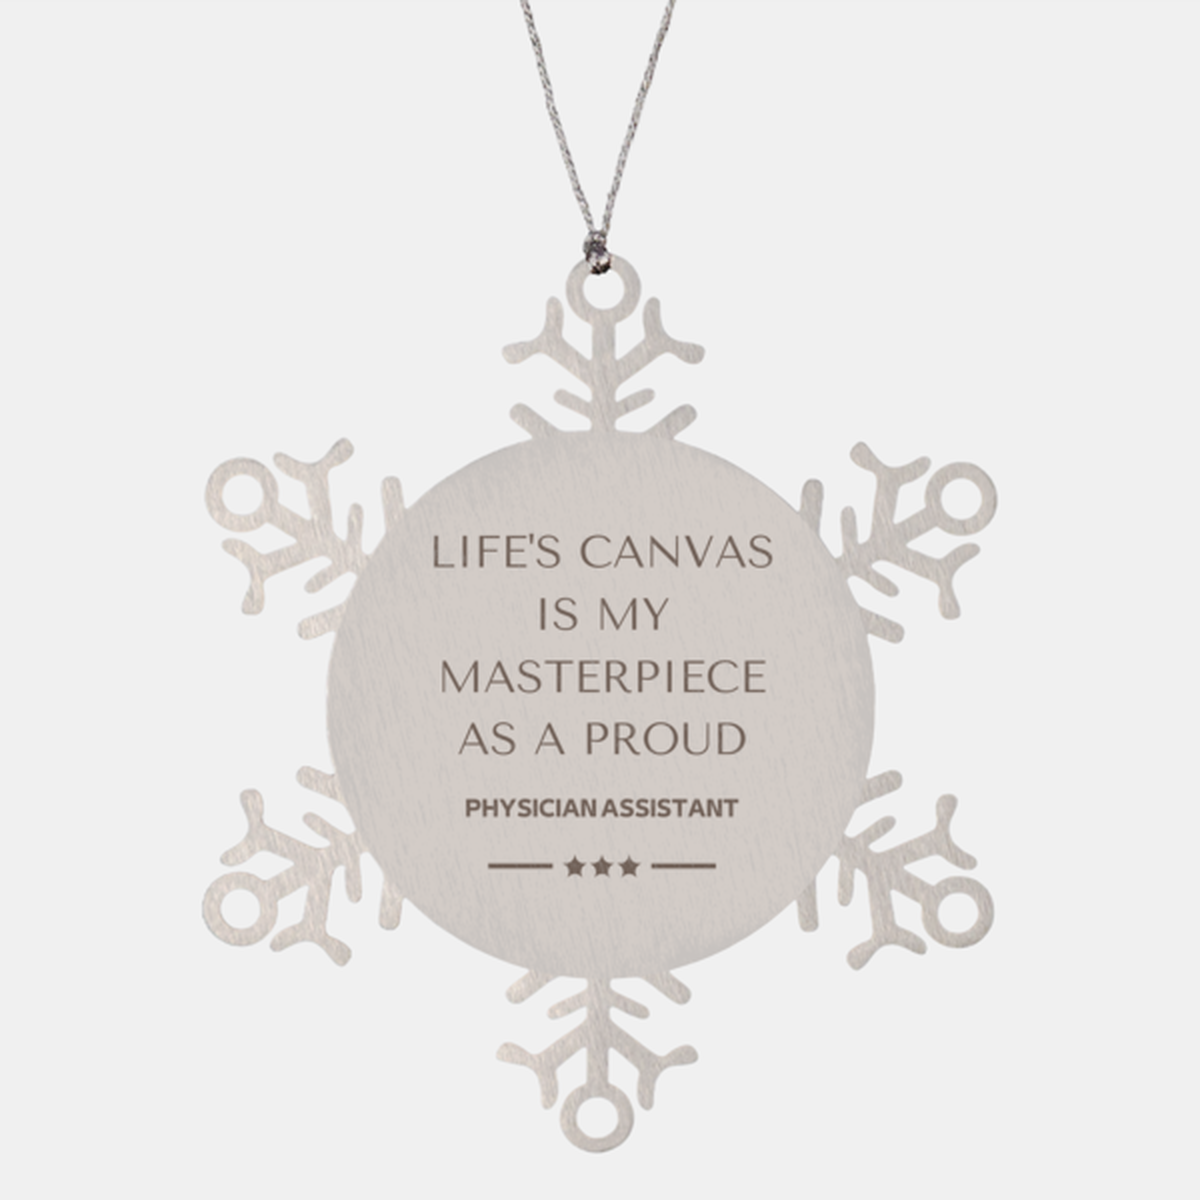 Proud Physician Assistant Gifts, Life's canvas is my masterpiece, Epic Birthday Christmas Unique Snowflake Ornament For Physician Assistant, Coworkers, Men, Women, Friends